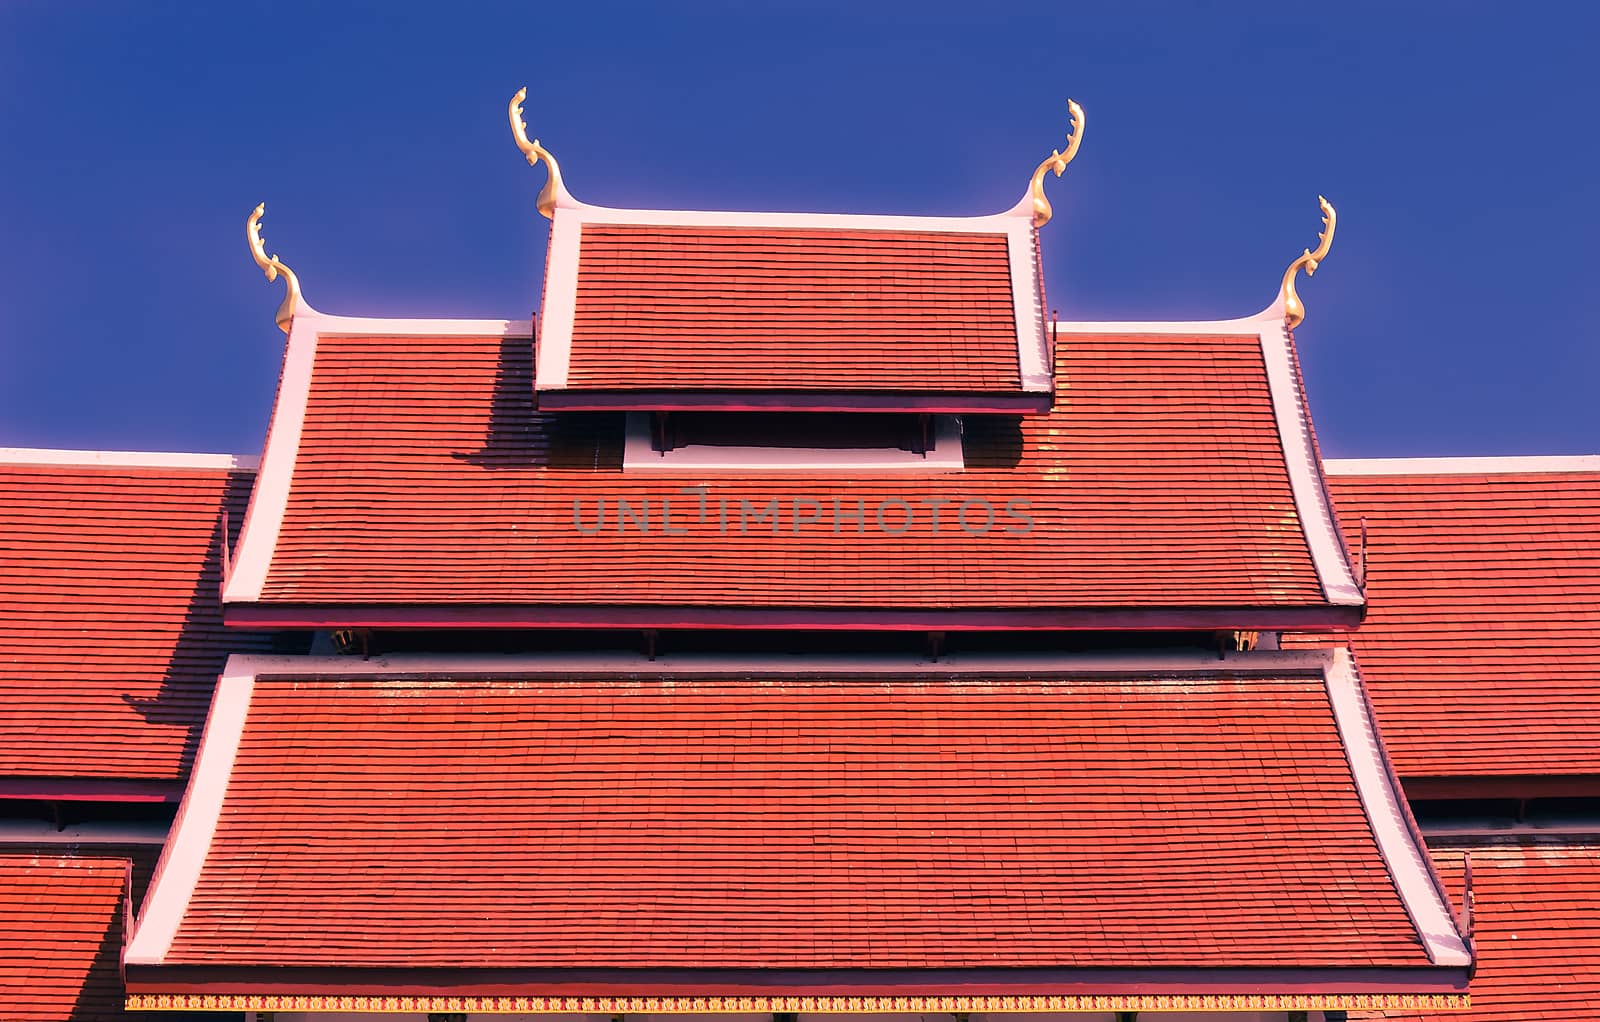 Tile Roof Achitecture of Buddhist Temple by kobfujar